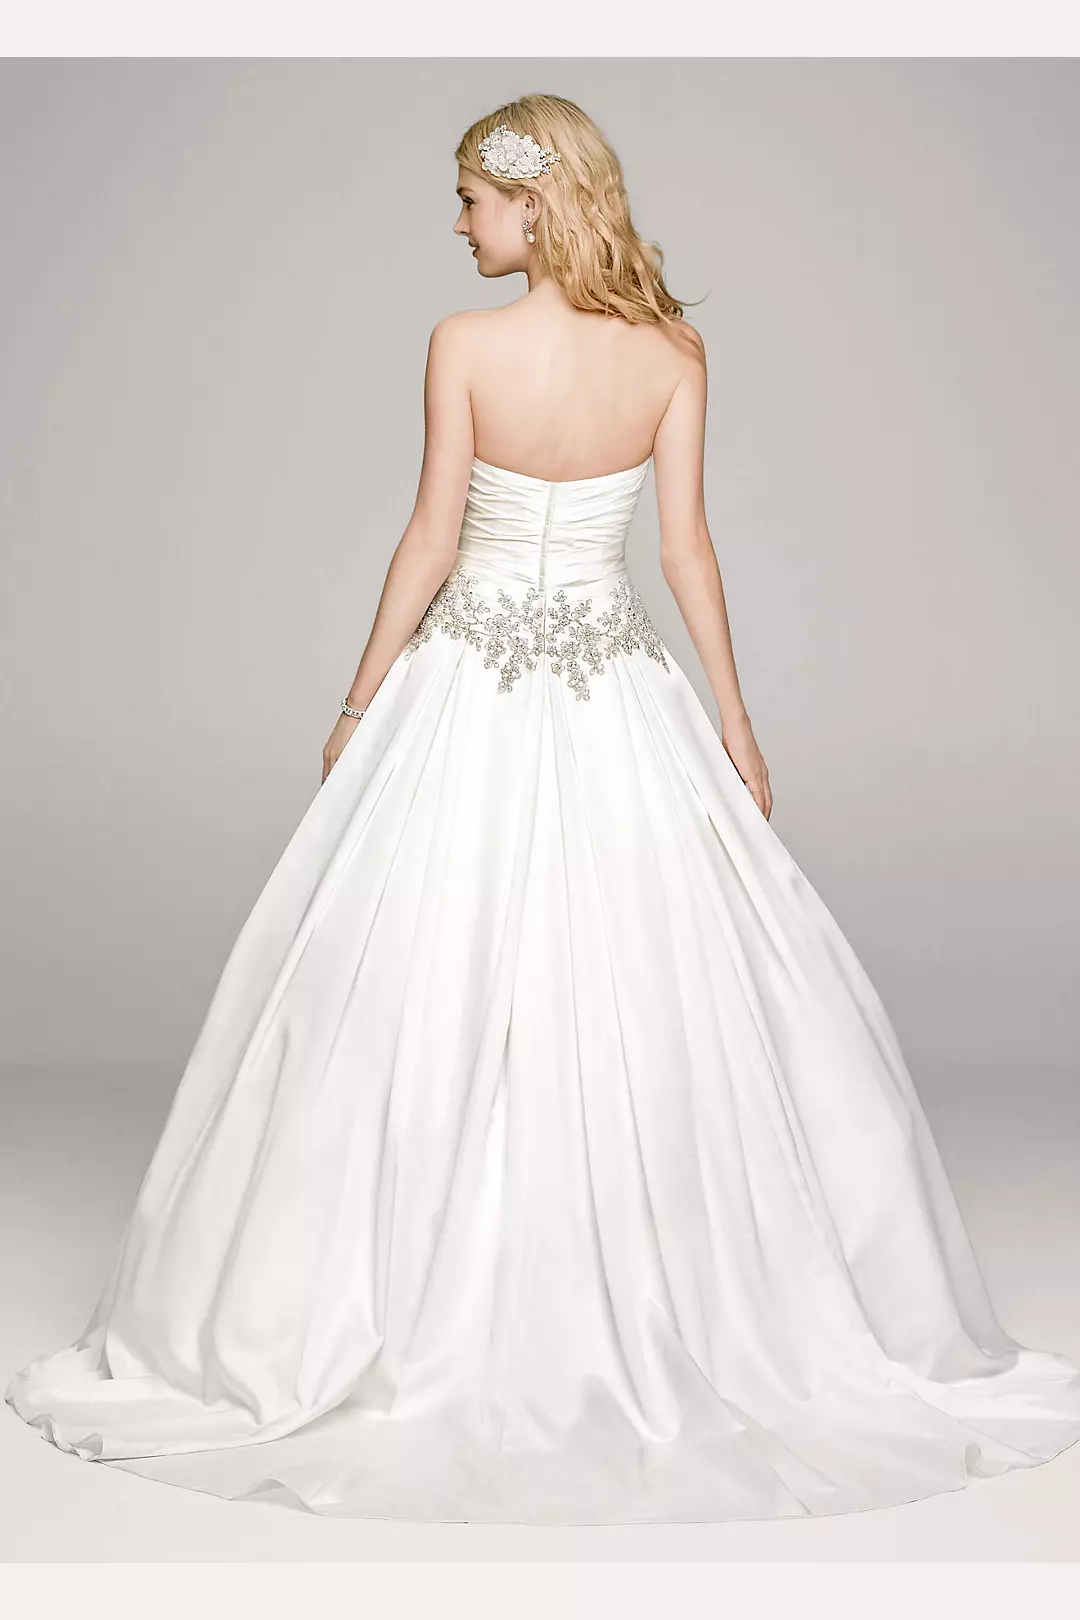 Strapless Satin Wedding Dress with Beaded Accents Image 2